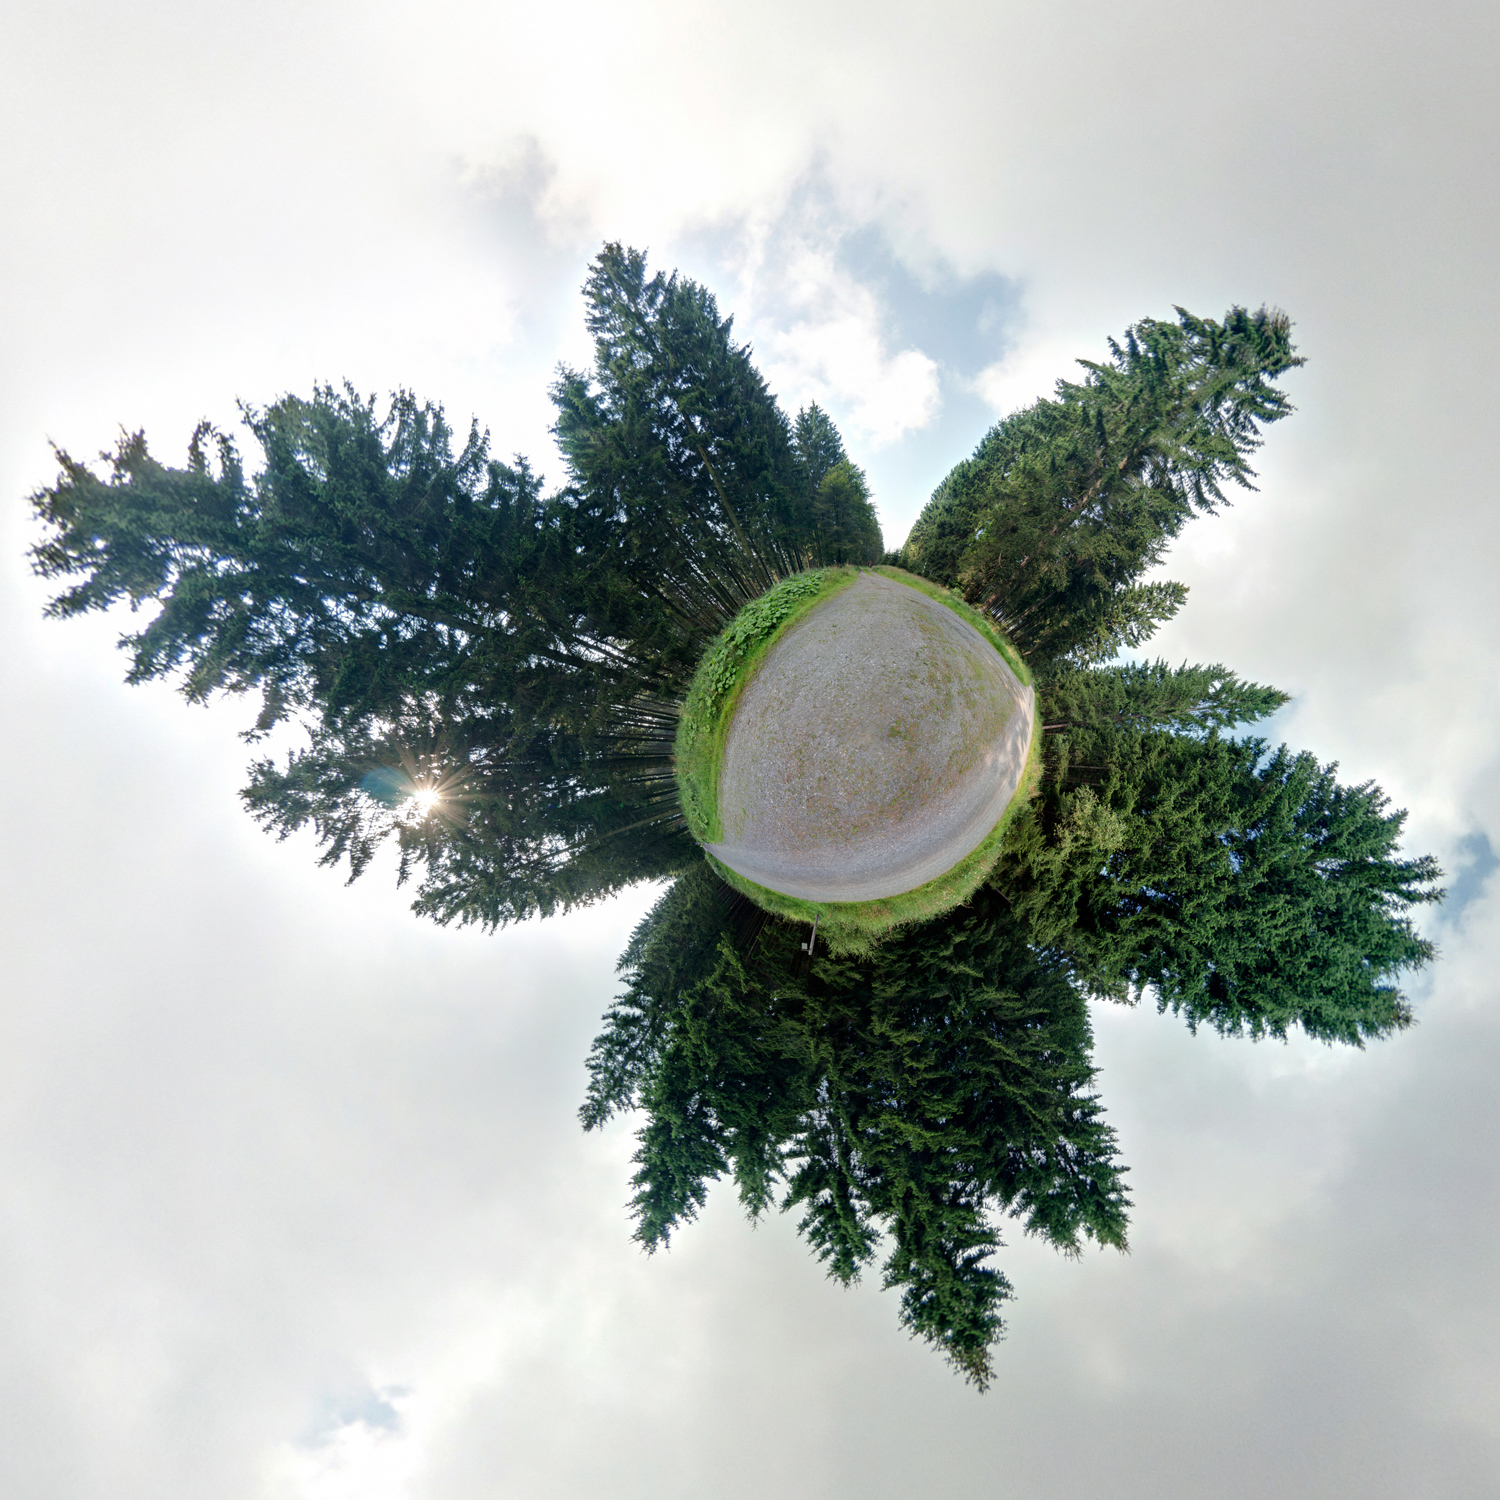 Panorama 205 - Little Planet